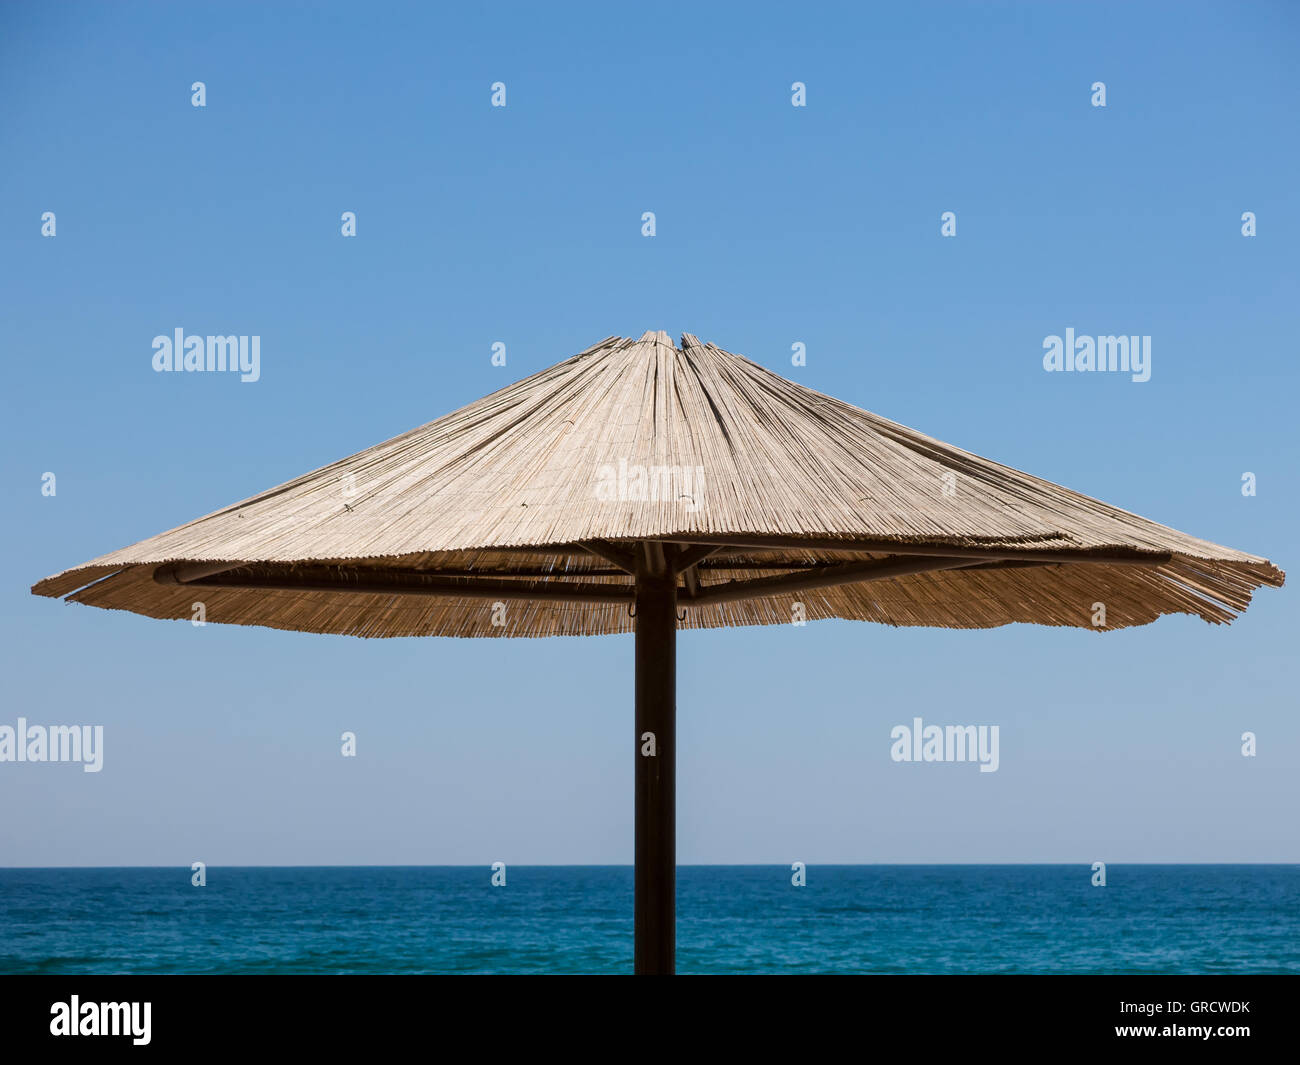 Upper Part Of A Single Sunshade Made Of Straw Against Blue Sky And Sea Stock Photo